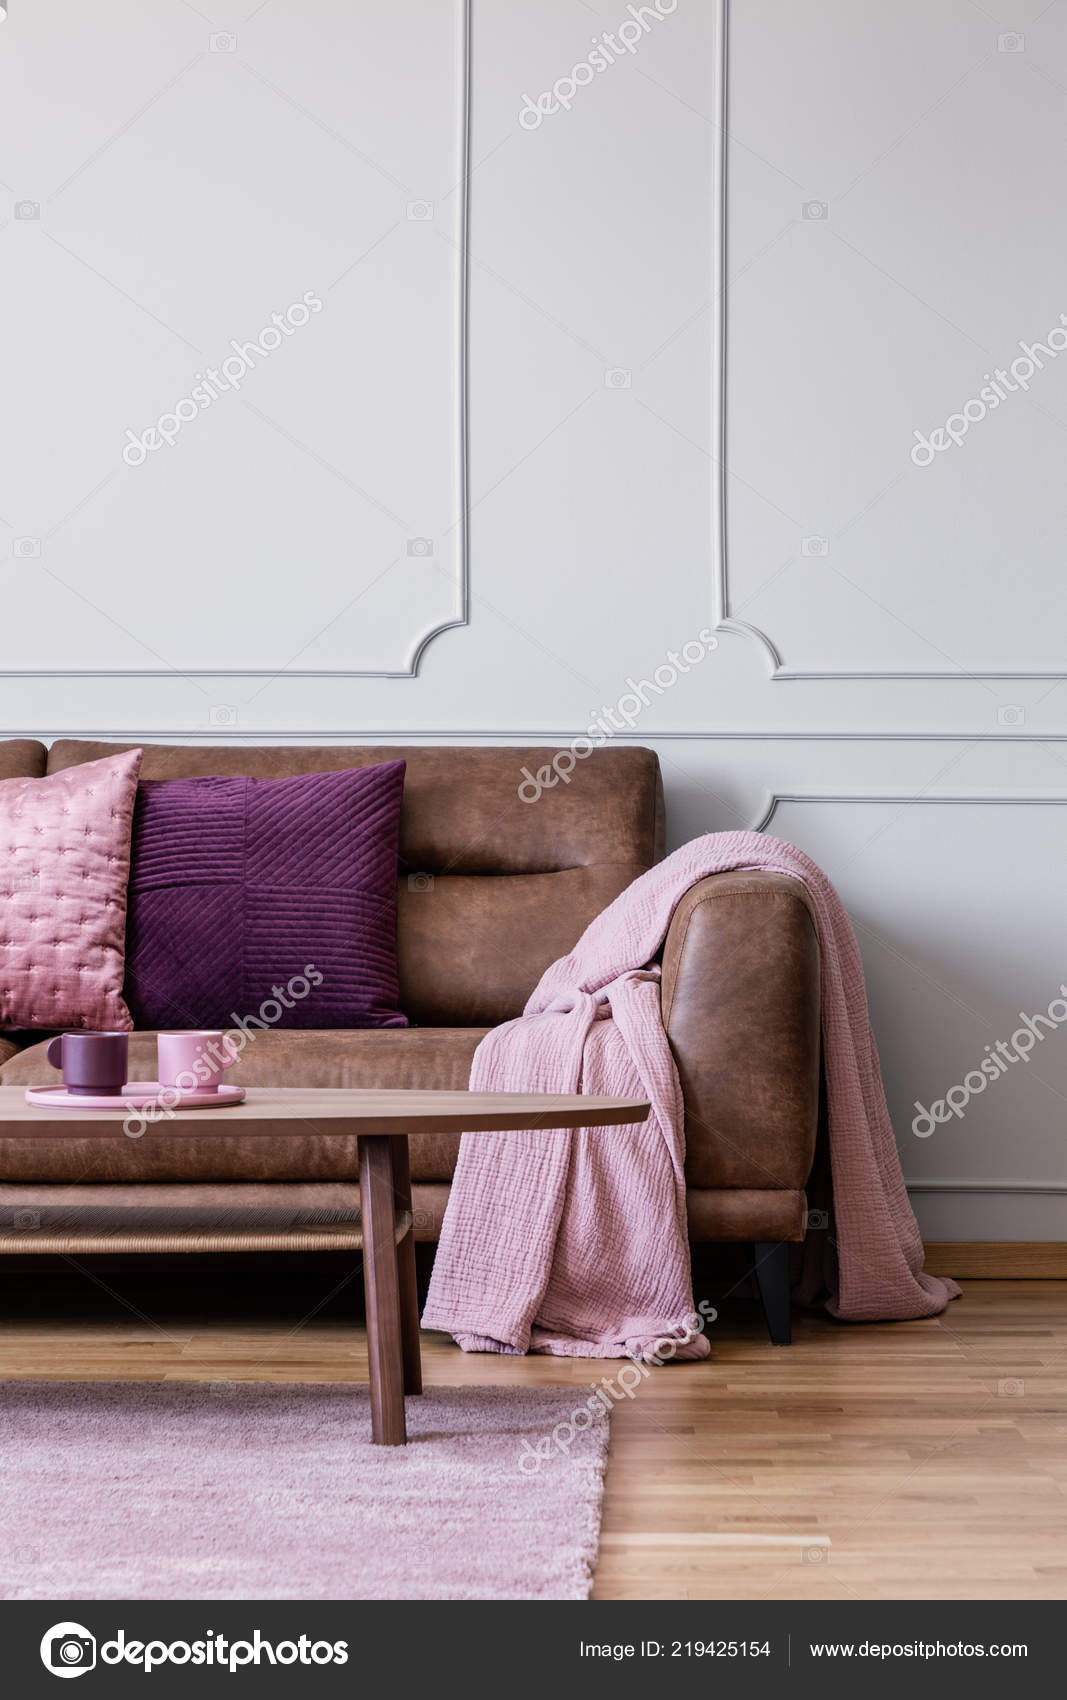 Pink Blanket Violet Cushion Leather, Bright Pink Sofa Throw